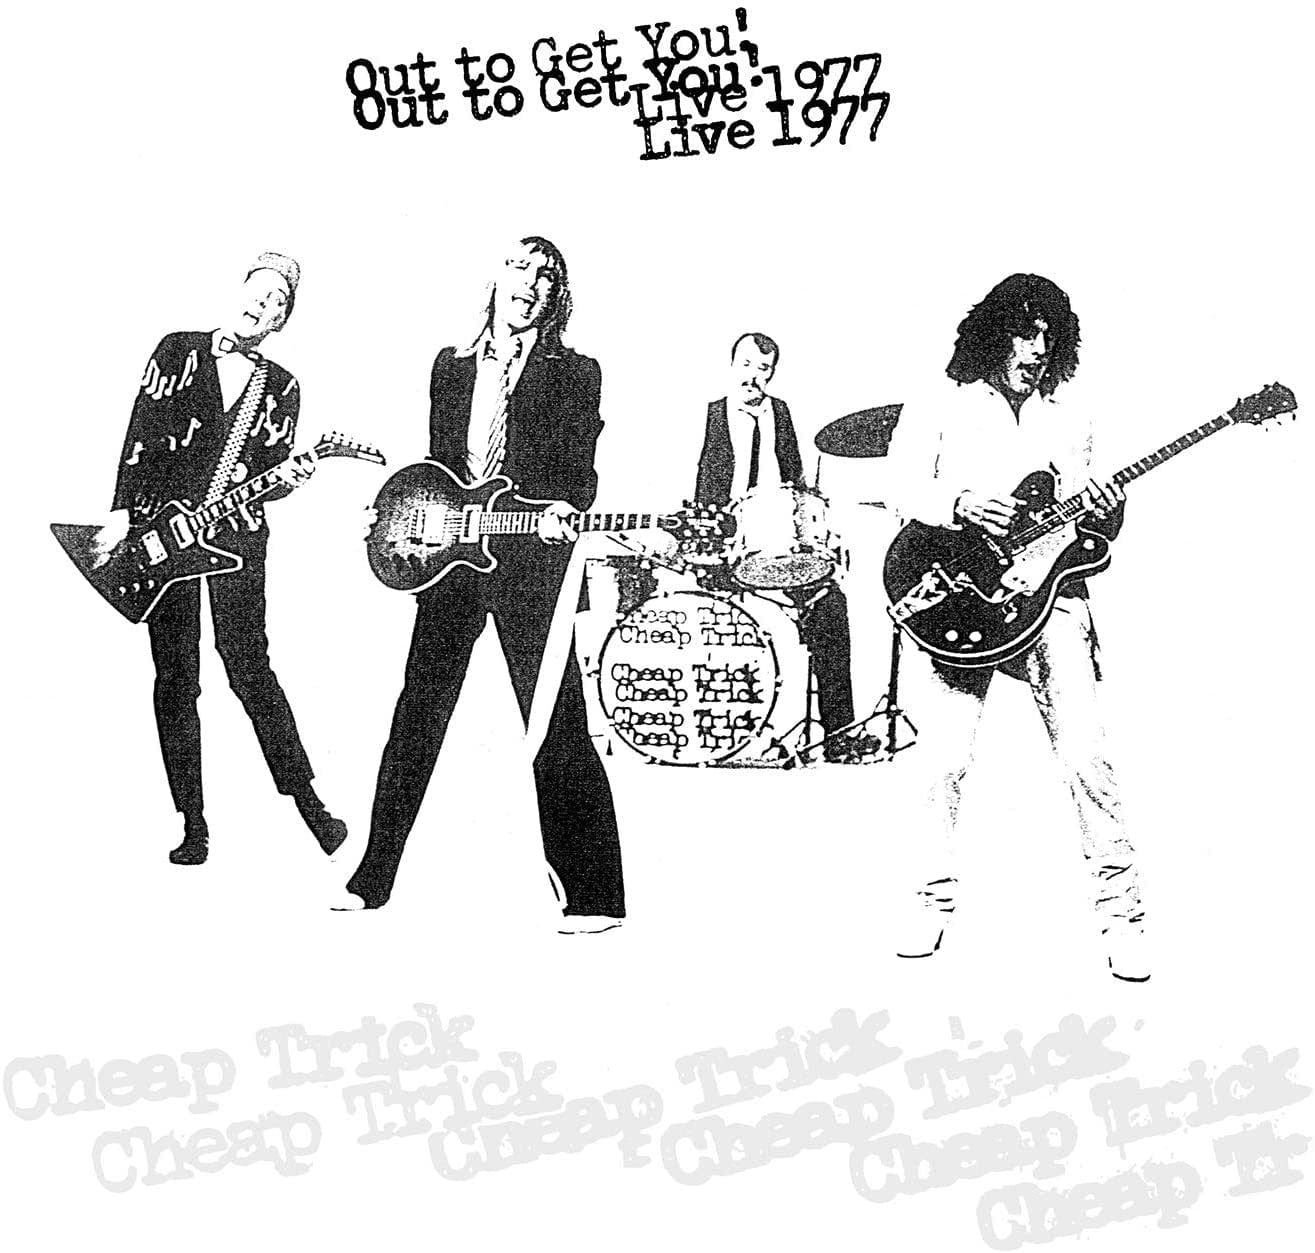 Out to Get You! Live 1977 - Cheap Trick (Rsd 2020) [Vinyl]